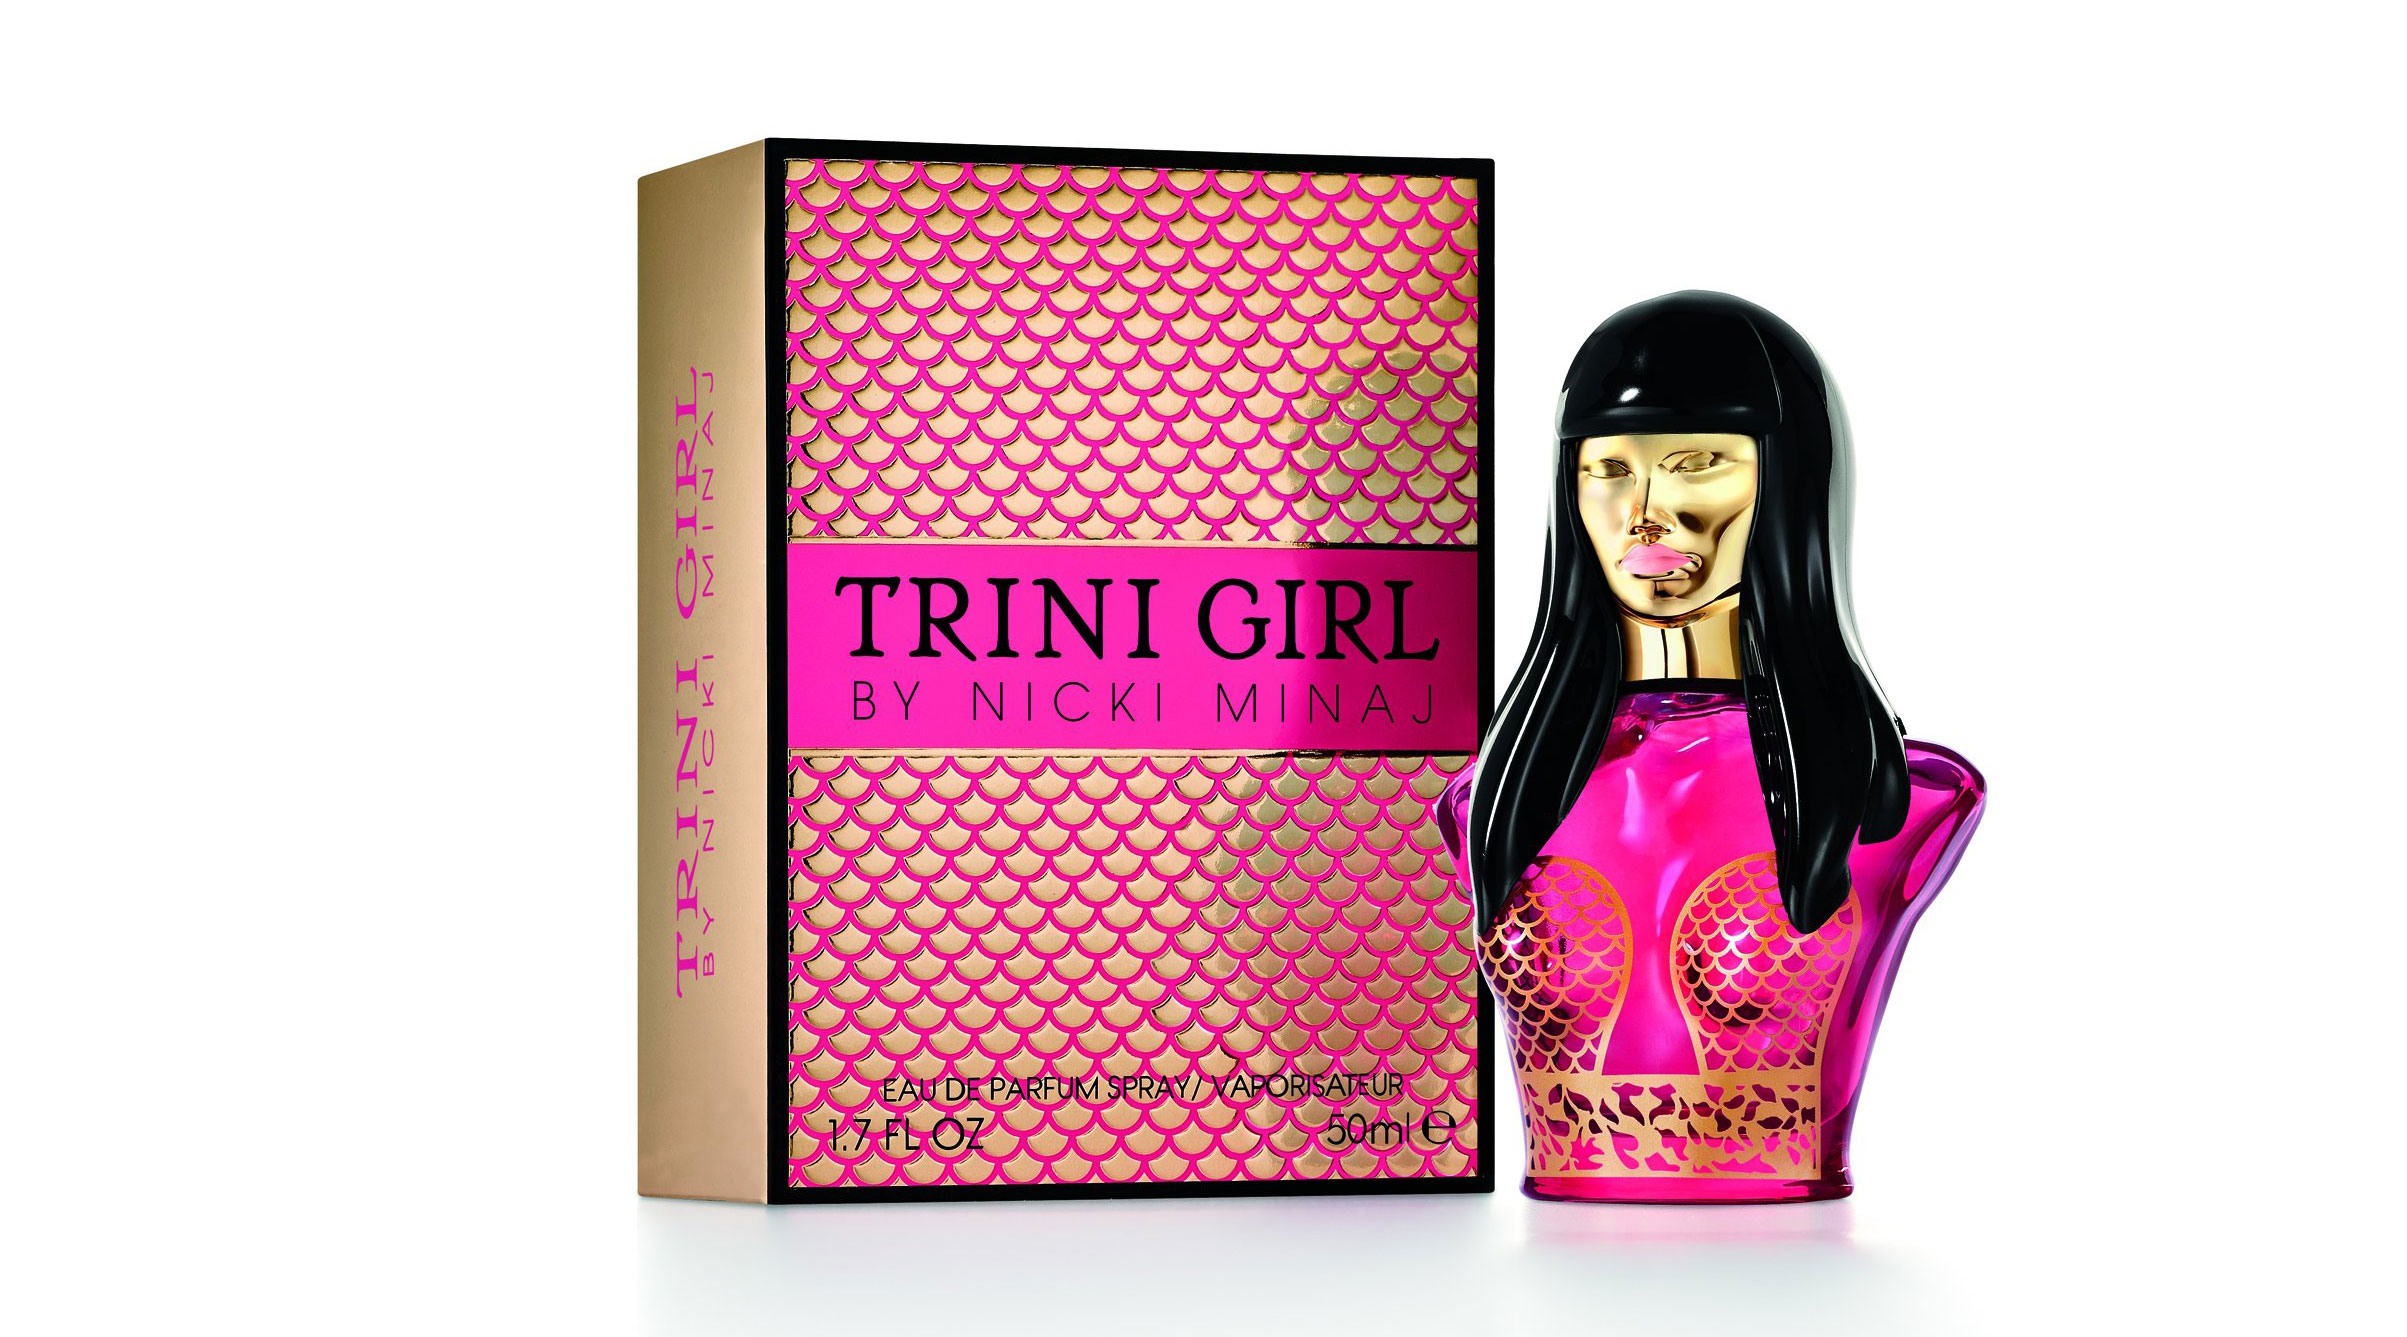 Nicki Minaj pays homage to her Trinidadian roots with her new fragrance